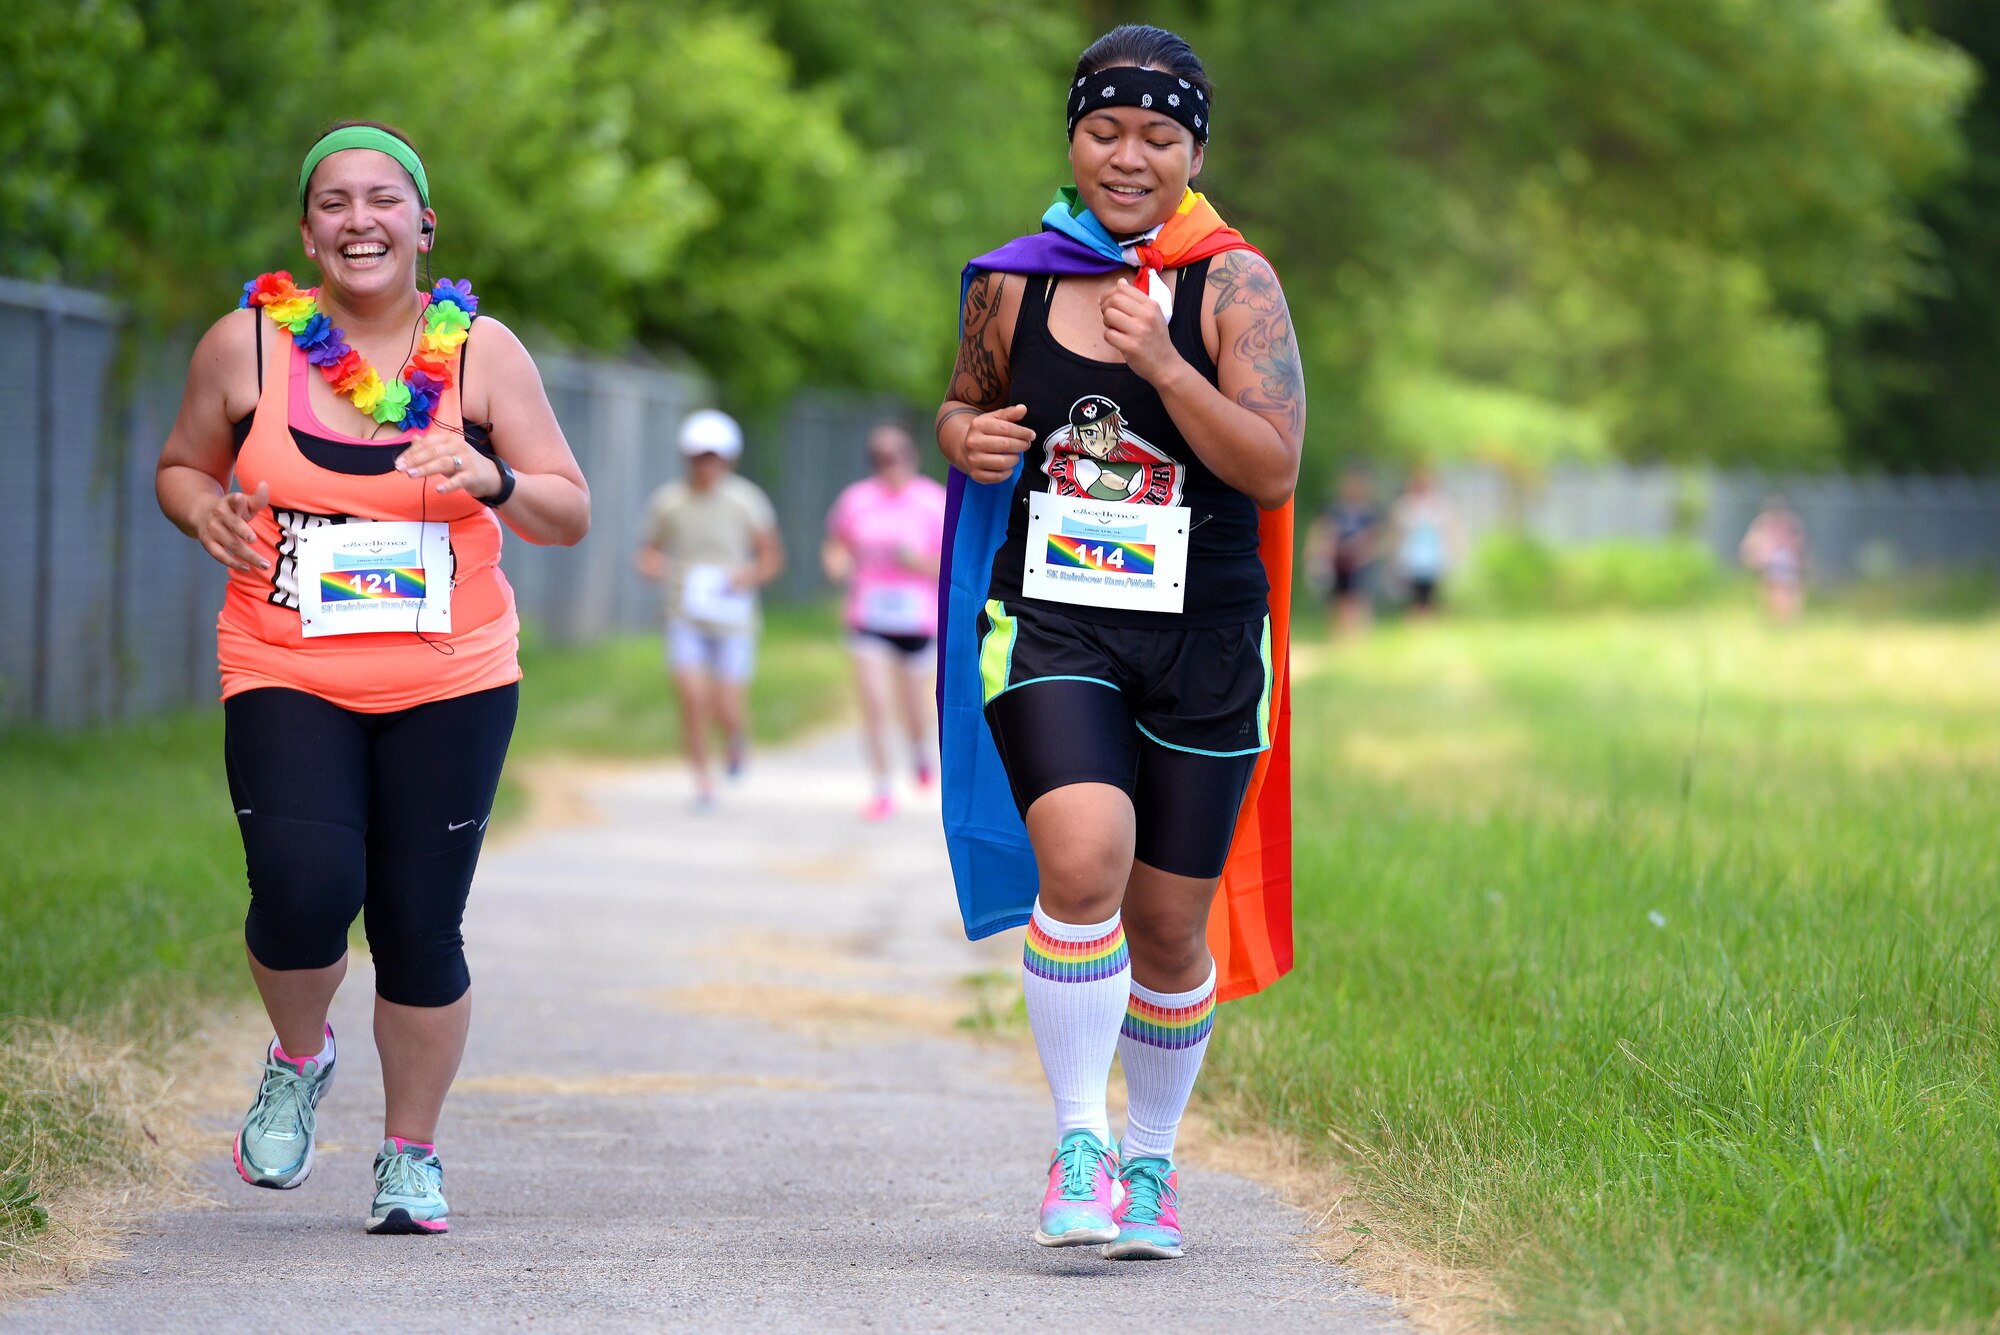 Staff Sgt. Diane Balmer, left, 55th Force Support Squadron, and Hazael Policarpio, 49th Intelligence Squadron, participate in the Rainbow 5K Run/Walk June 23 at Offutt Air Force Base, Neb. The event was held as part of LGBT pride month to celebrate diversity among DOD members. (U.S. Air Force photo by Delanie Stafford/Released)